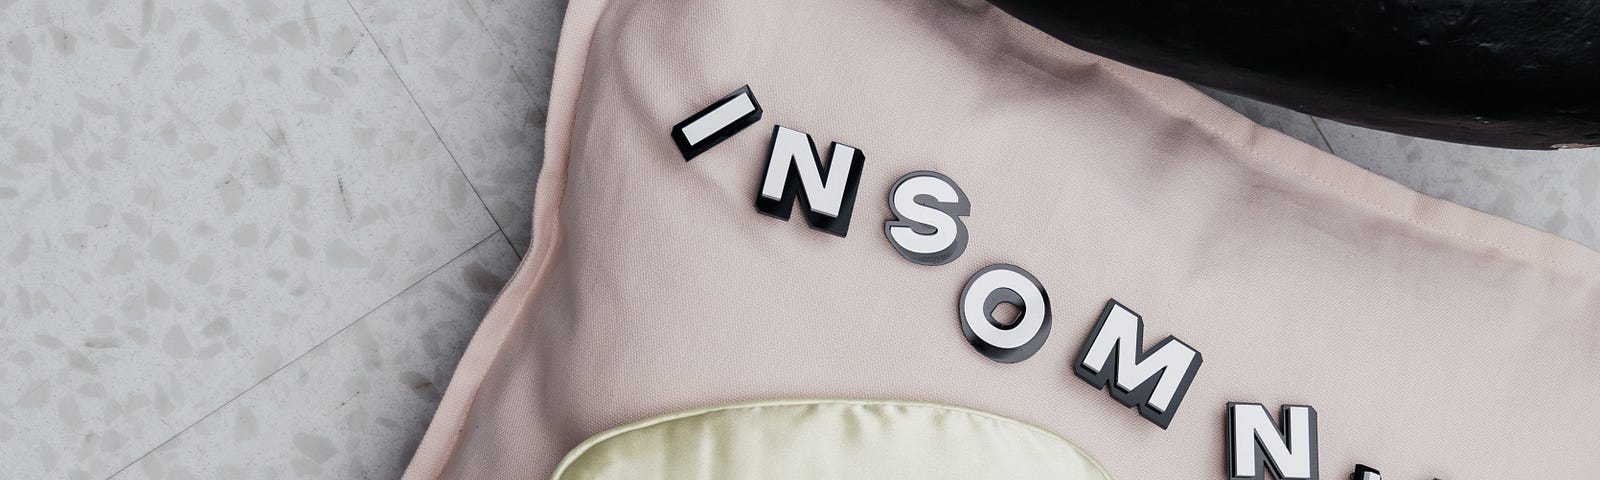 Pillow with Insomnia written on it, and a eye mask on top of it.